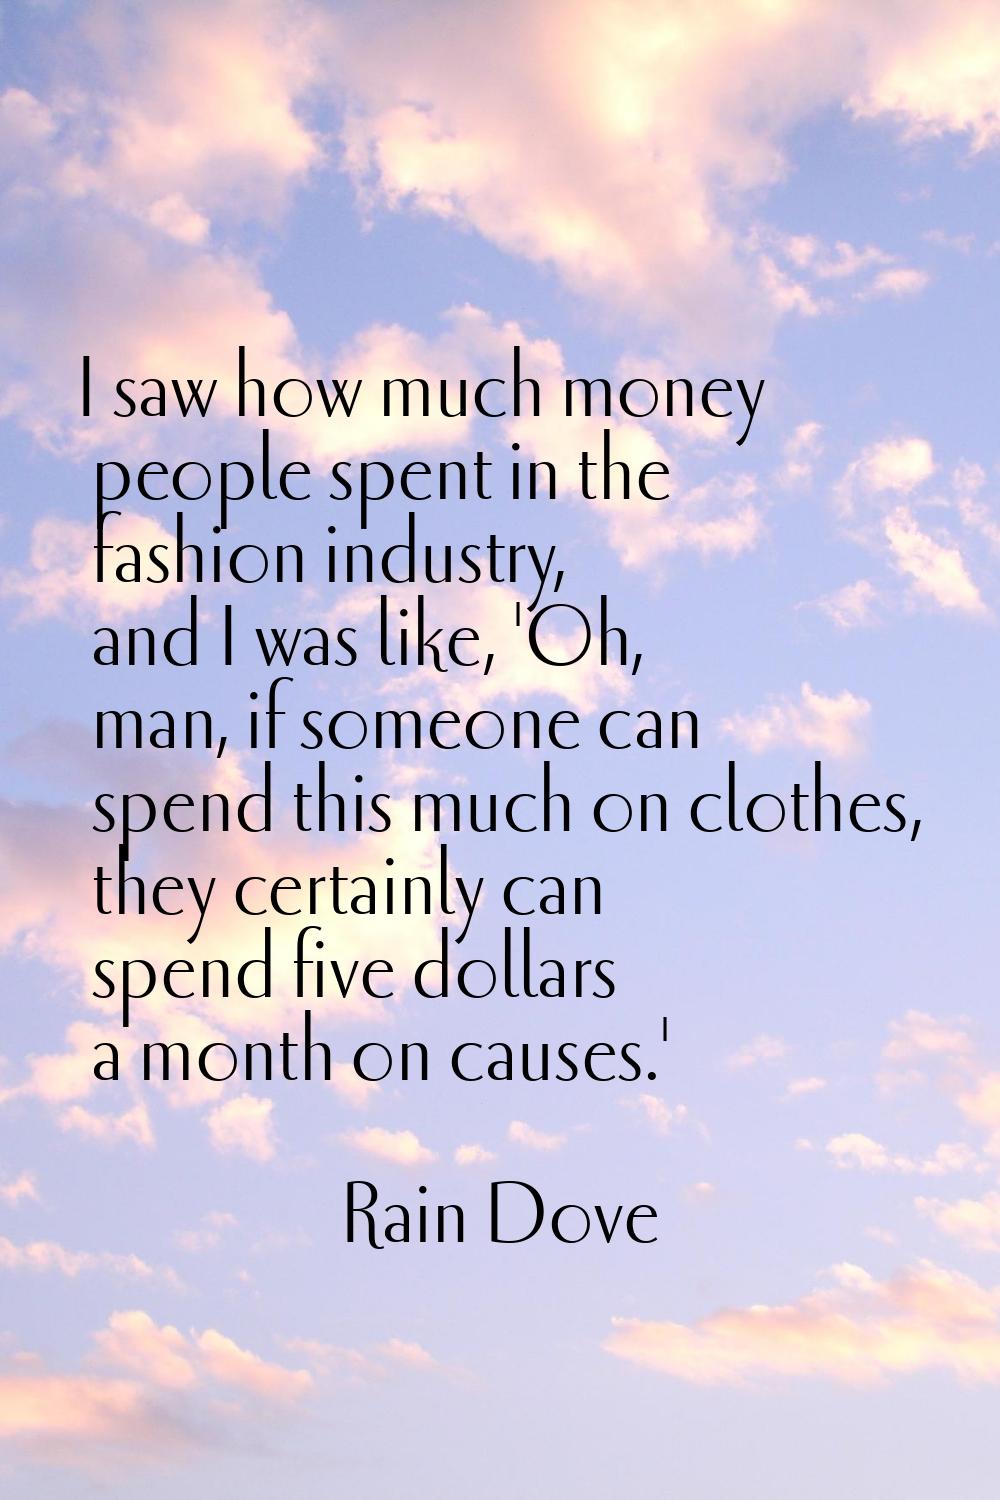 I saw how much money people spent in the fashion industry, and I was like, 'Oh, man, if someone can